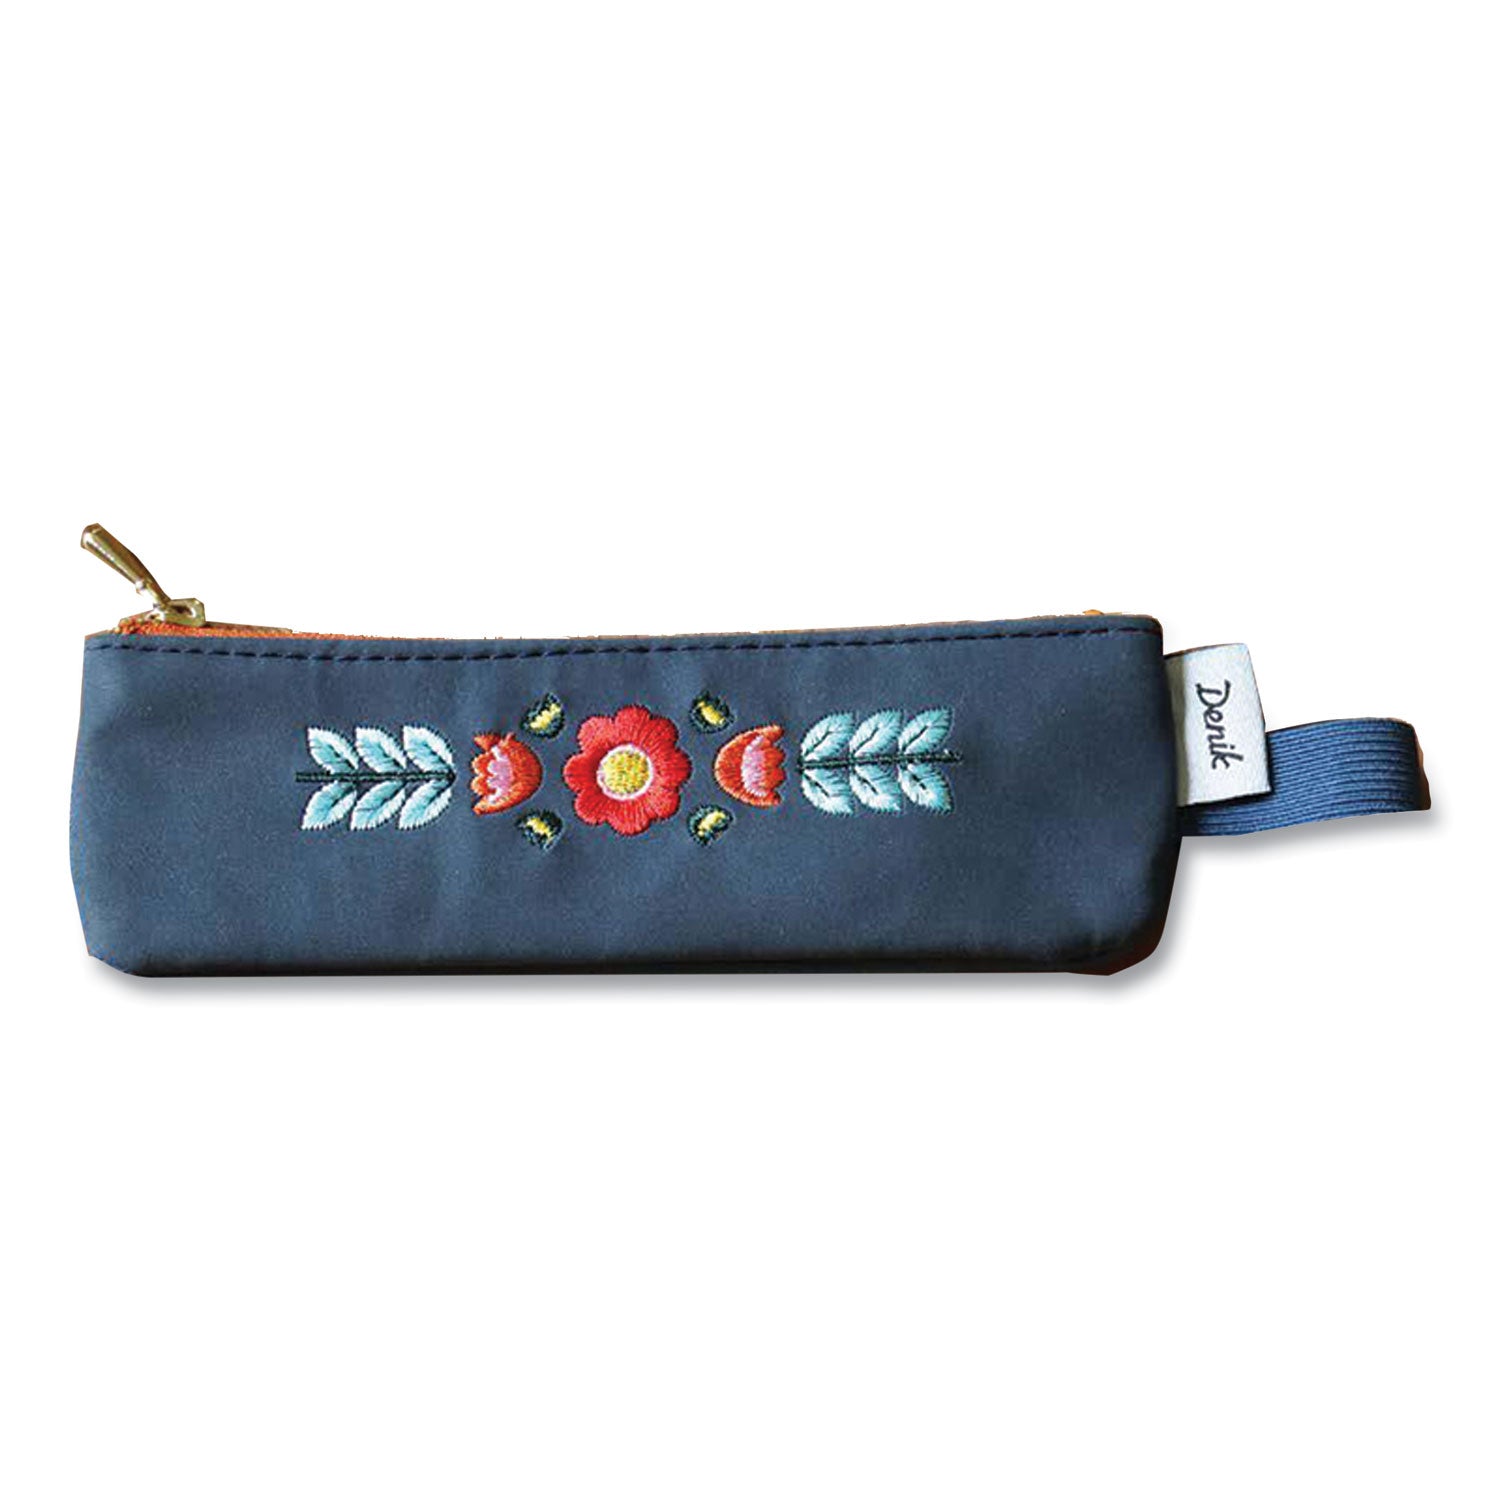 evelynn-zipper-vegan-suede-notebook-pouch-2-x-65-blue-with-embroidered-flower_dnknbpouch550 - 1